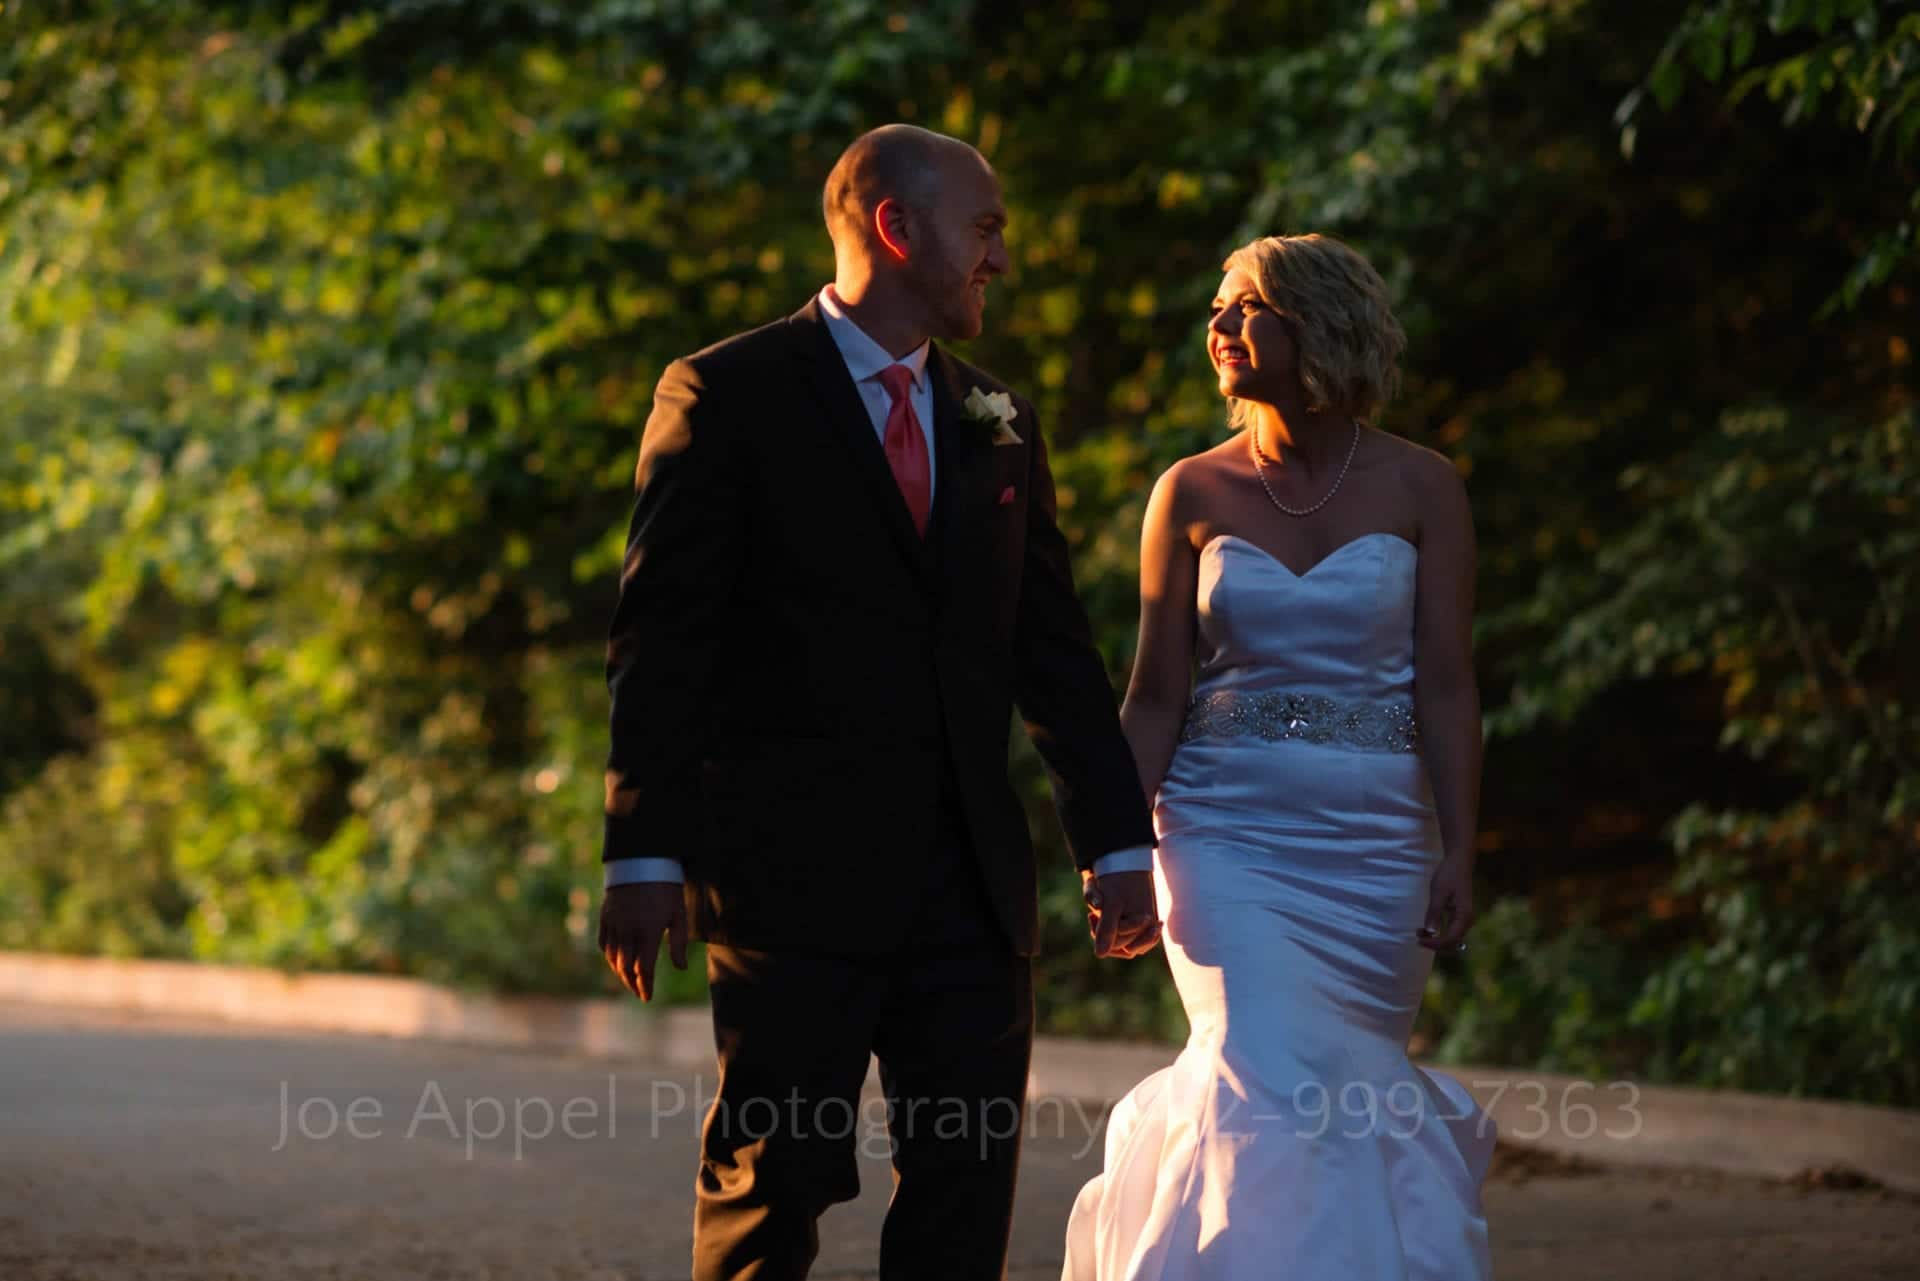 A bride and groom hold hands and walk while illuminated by the setting sun.